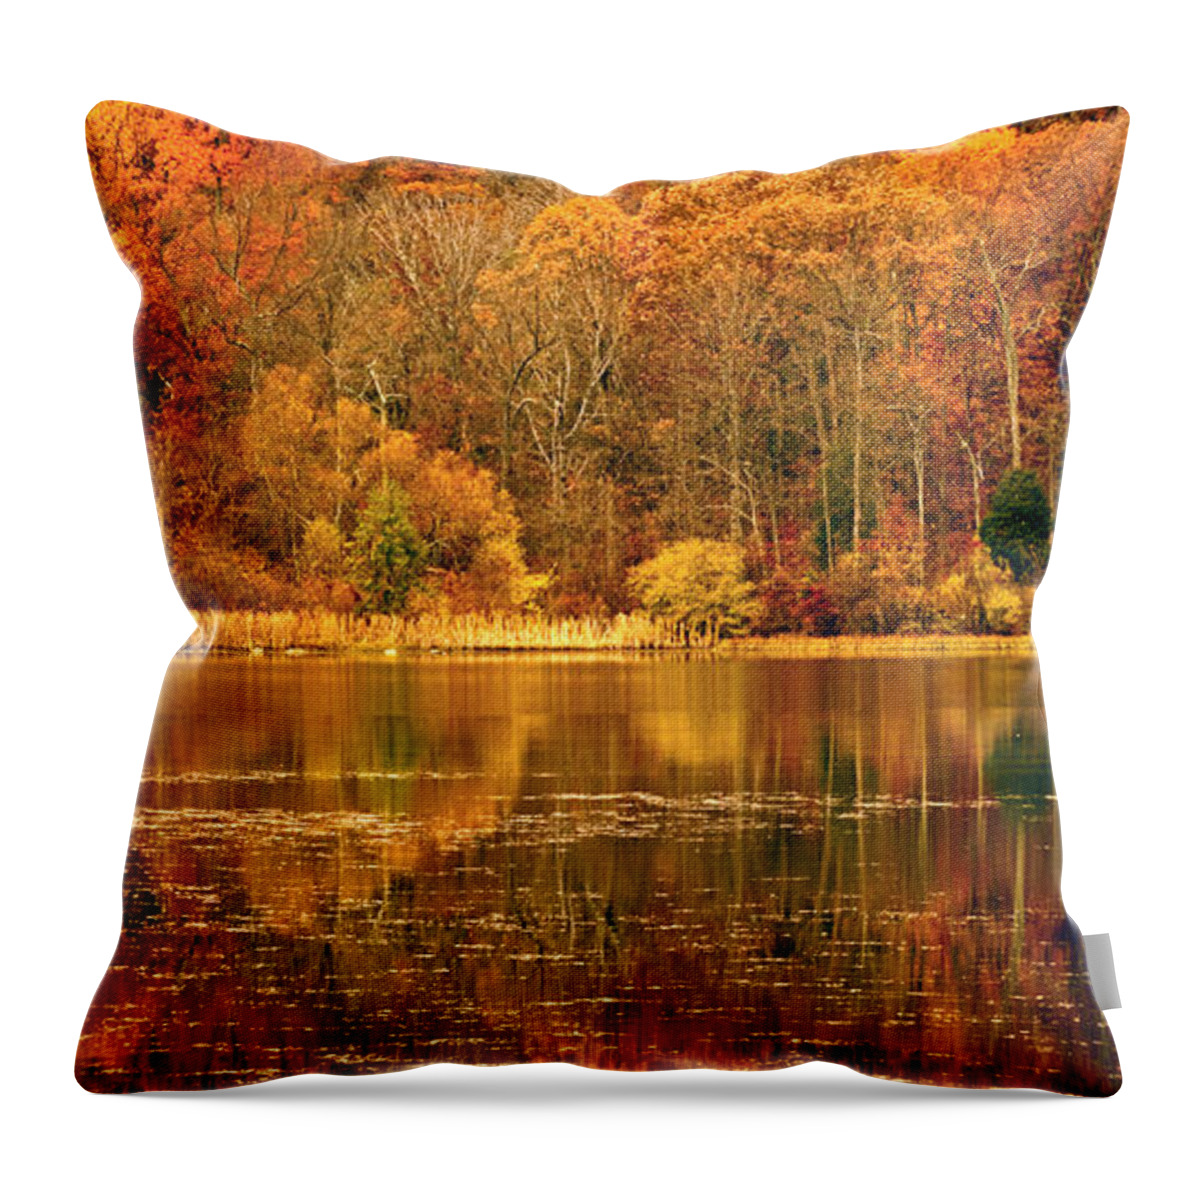 Water Throw Pillow featuring the photograph Autumn in Mirror Lake by Paul W Faust - Impressions of Light